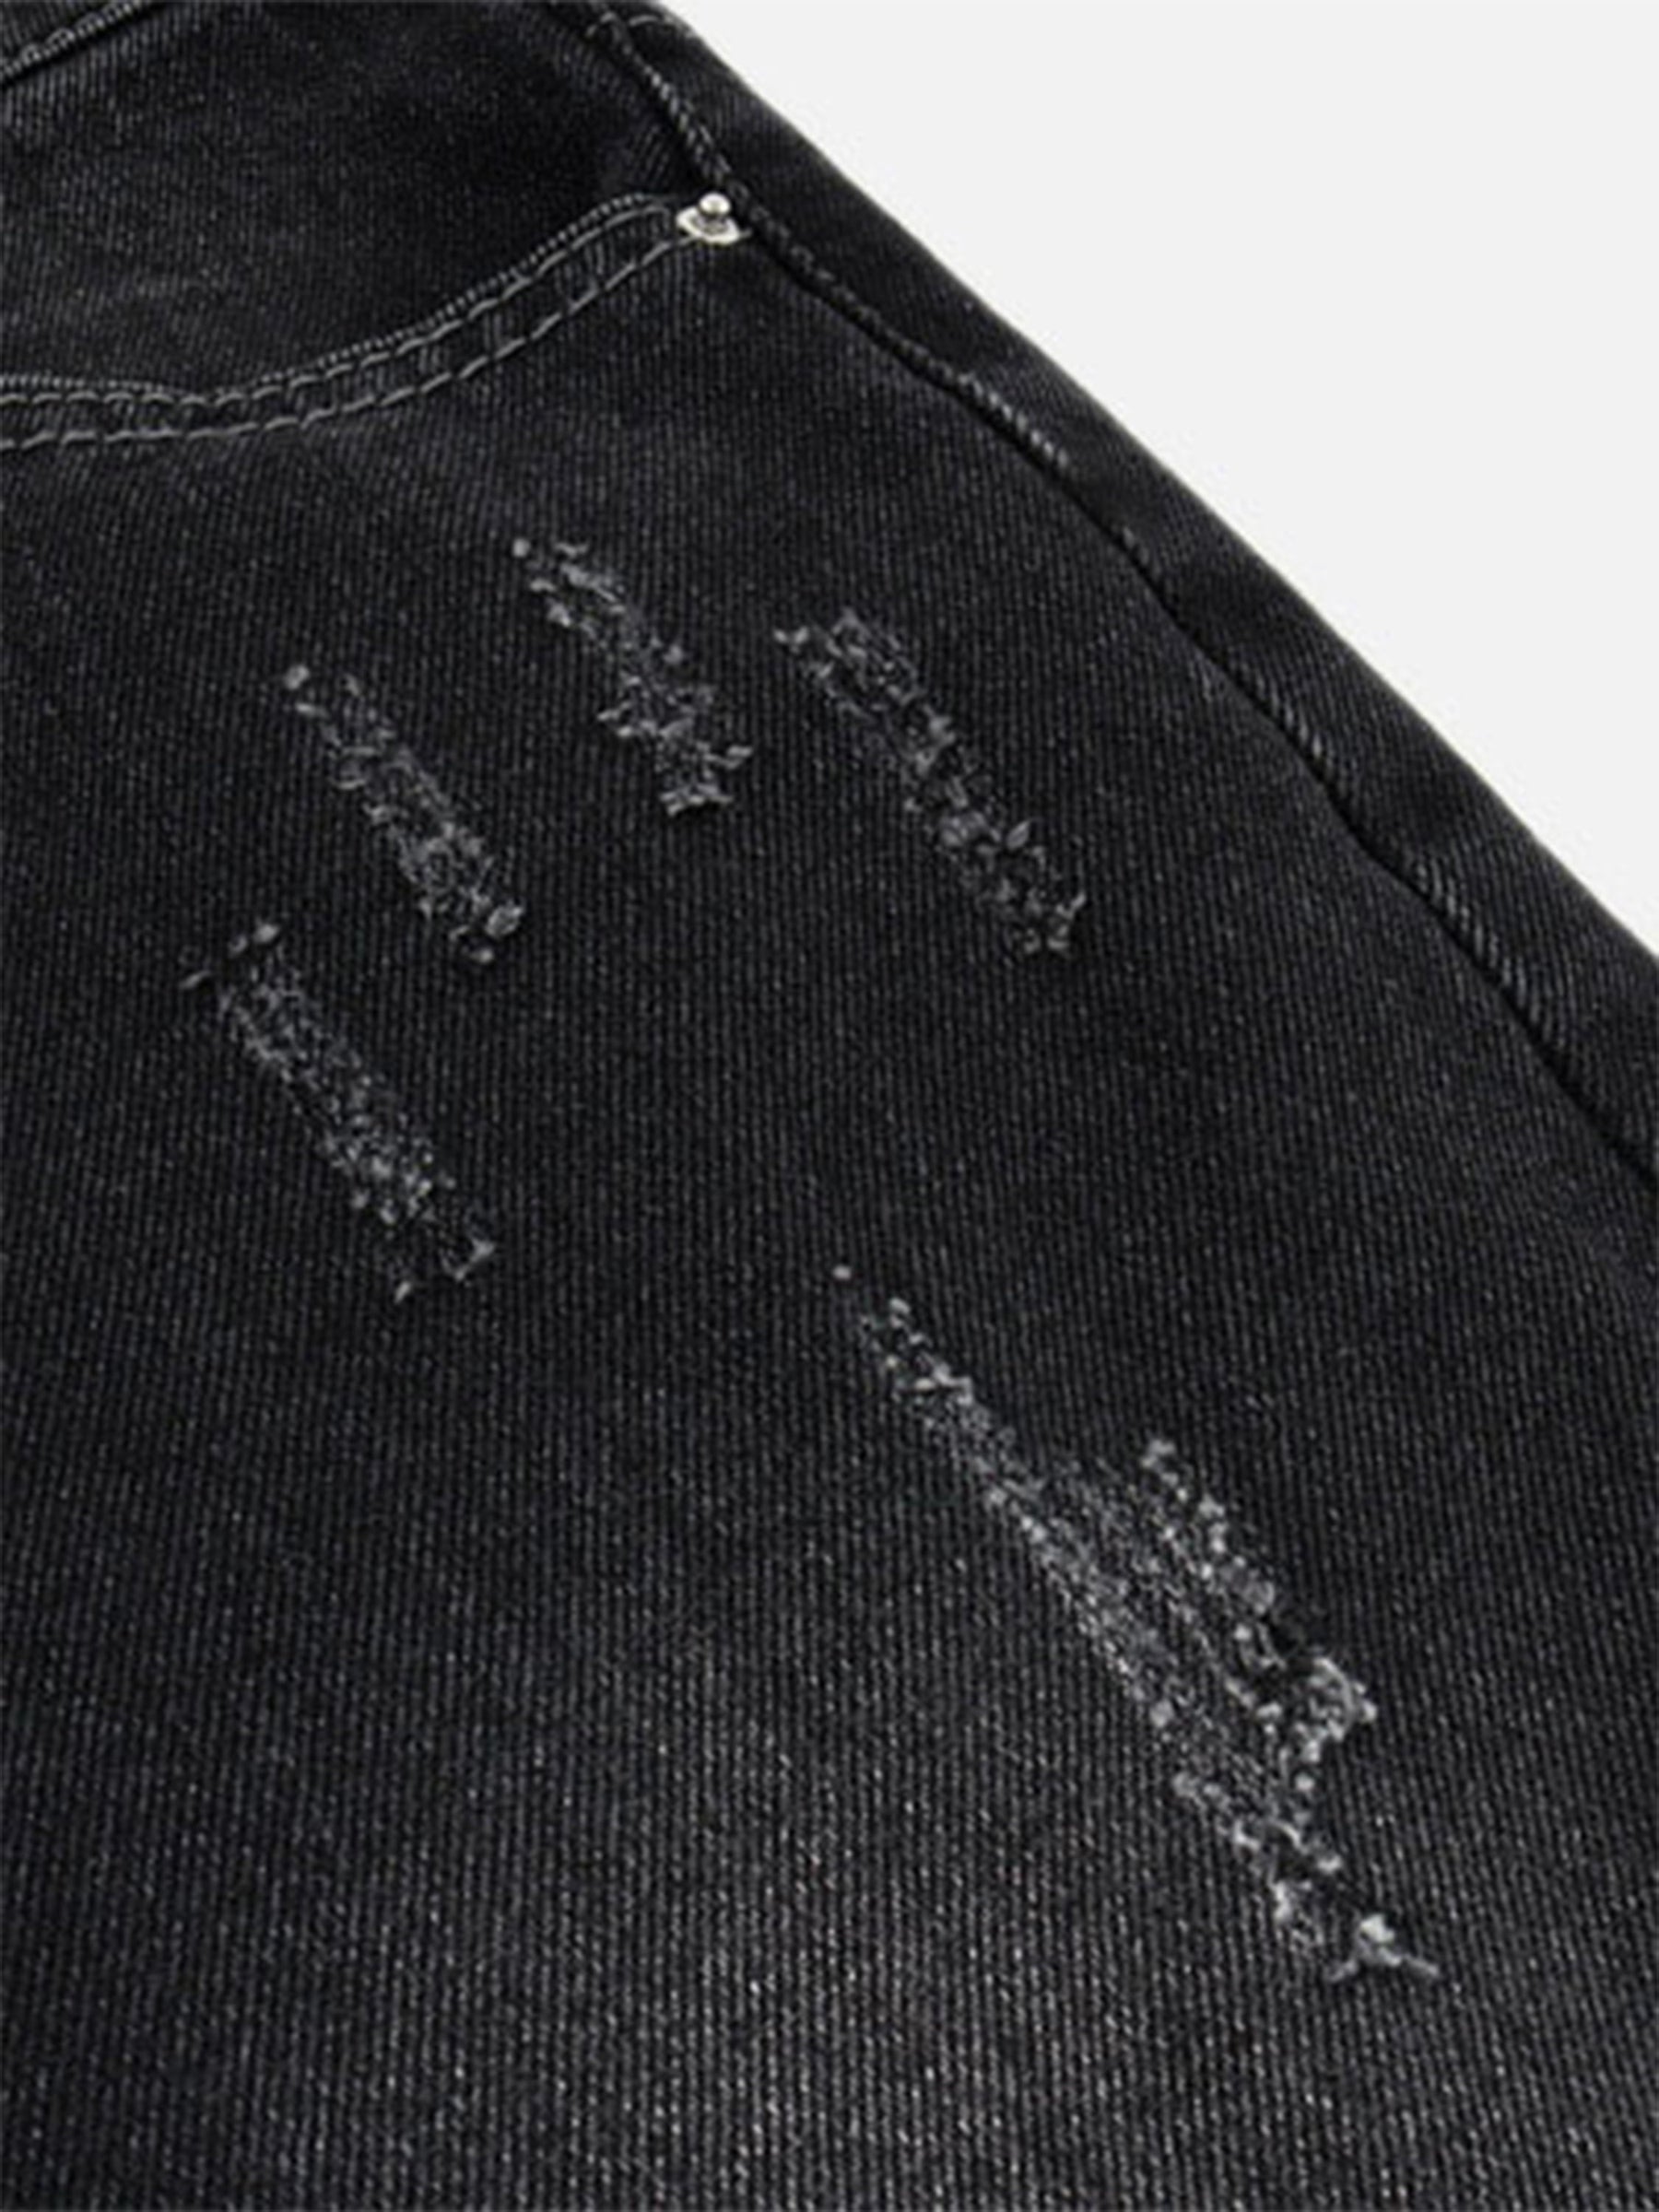 LUXENFY™ - American Street Style Pentagram Print Old Straight Jeans luxenfy.com